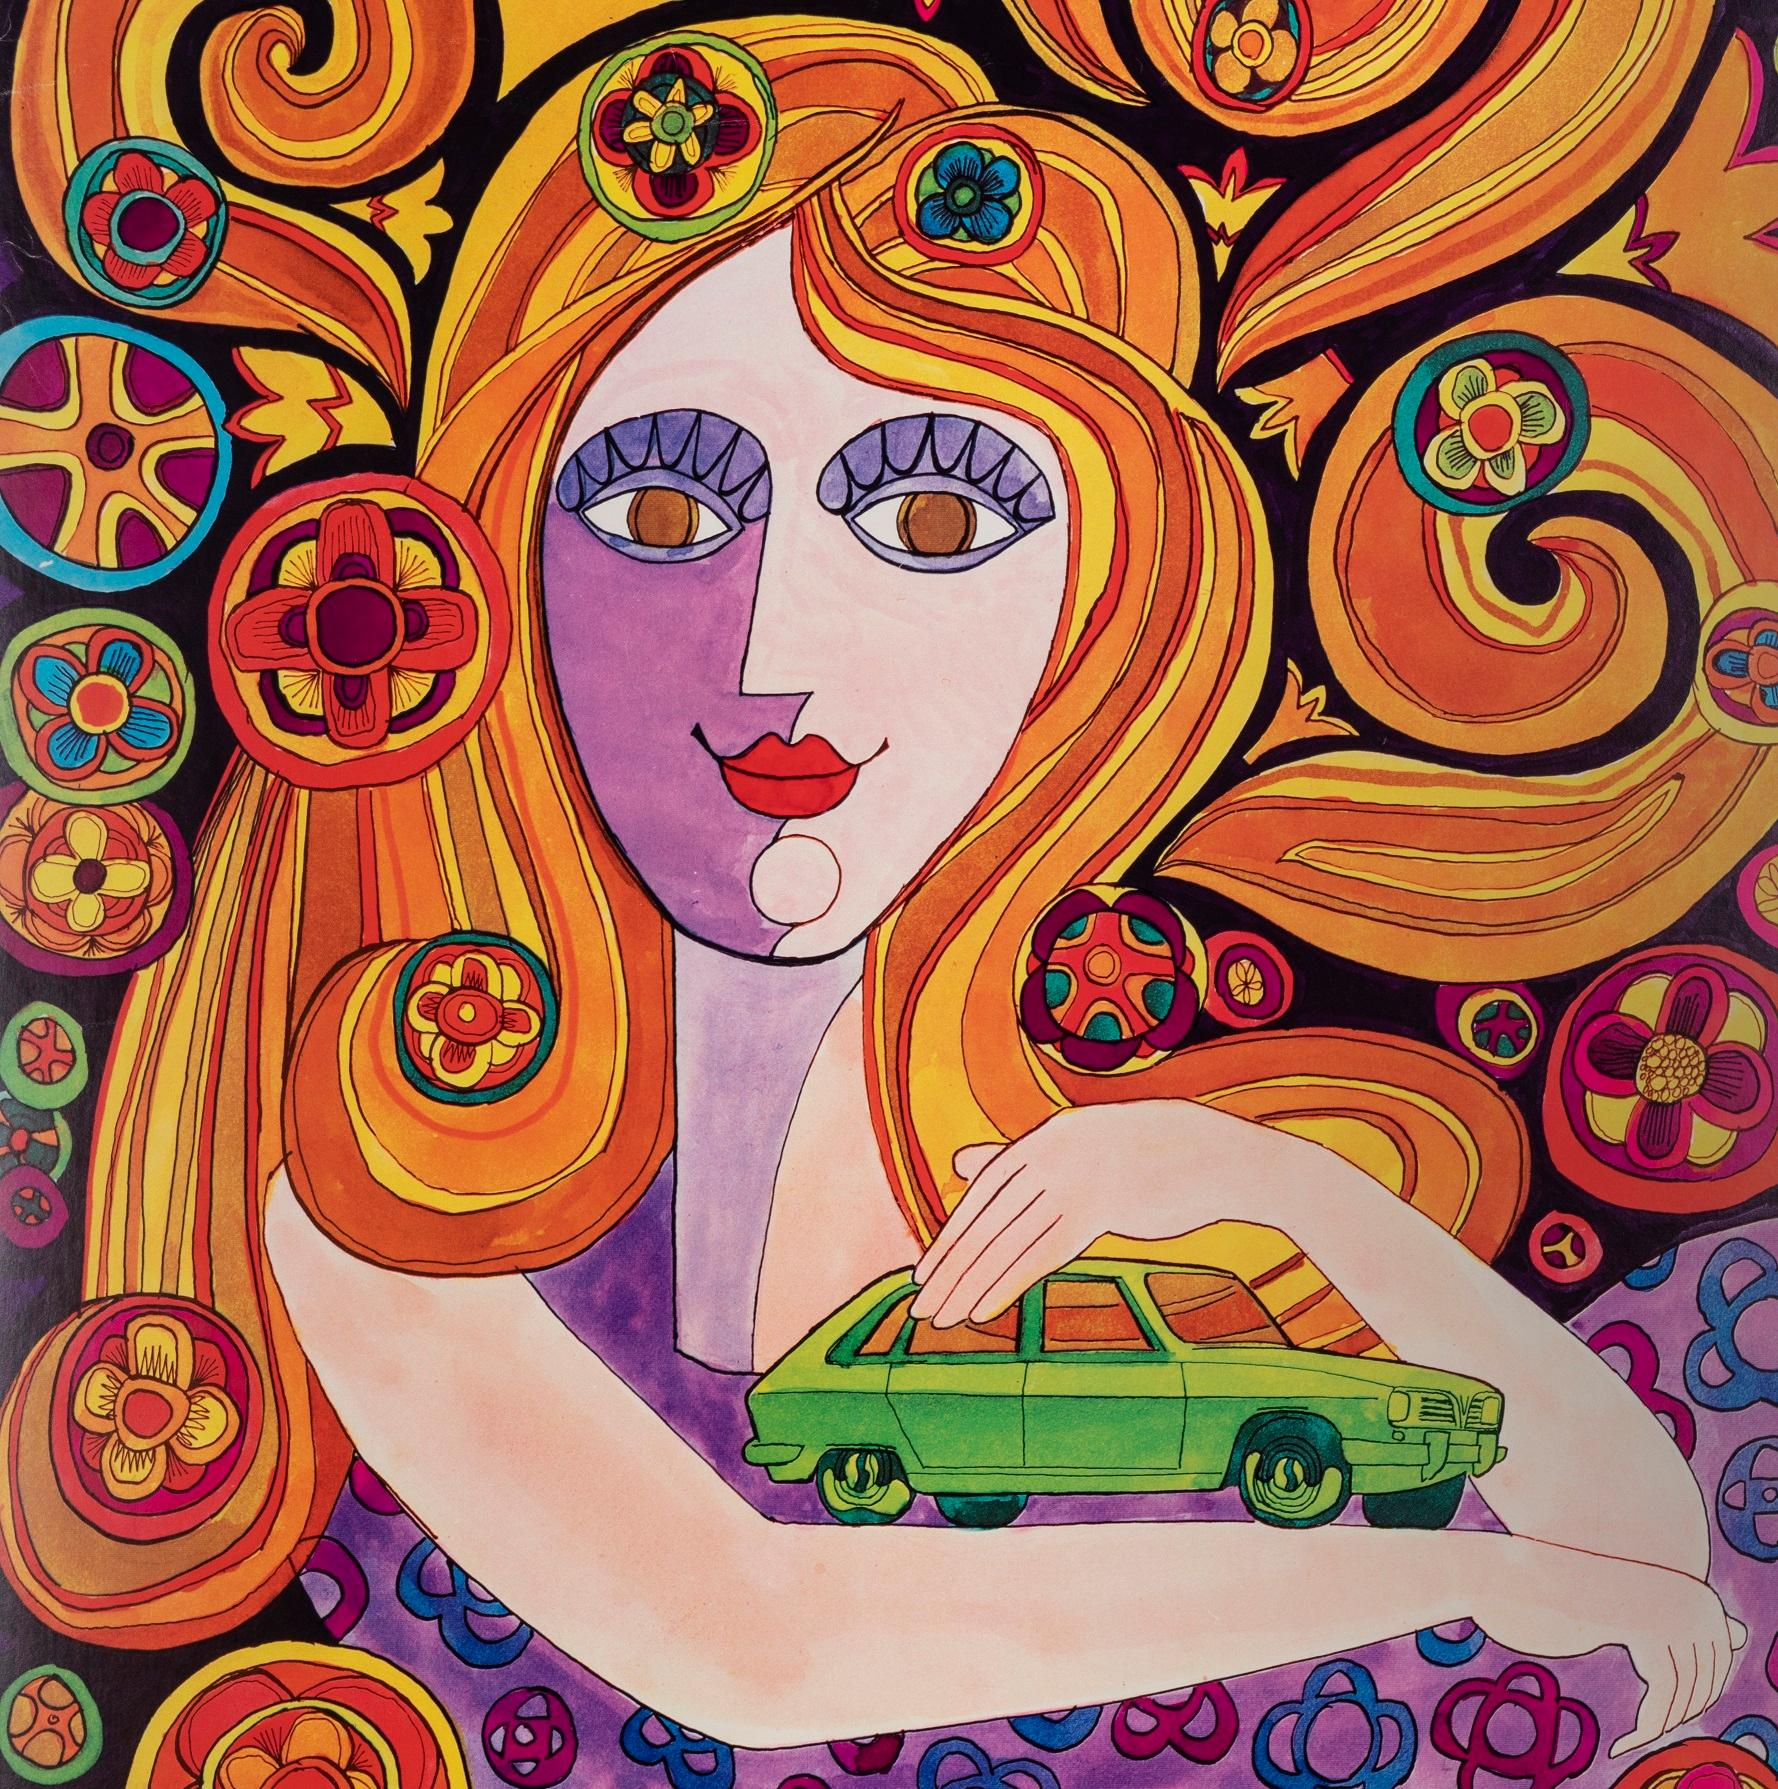 Psychedelic Vintage Poster created for Renault R16 in 1970.

Artist: Anonymous
Title: Renault R16 - Woman
Date: 1970
Size (w x h): 15.4 x 23.5 in / 39 x 59.6 cm
Printer: Ensemble 5 Studio Graphique
Materials and Techniques: Colour lithograph on